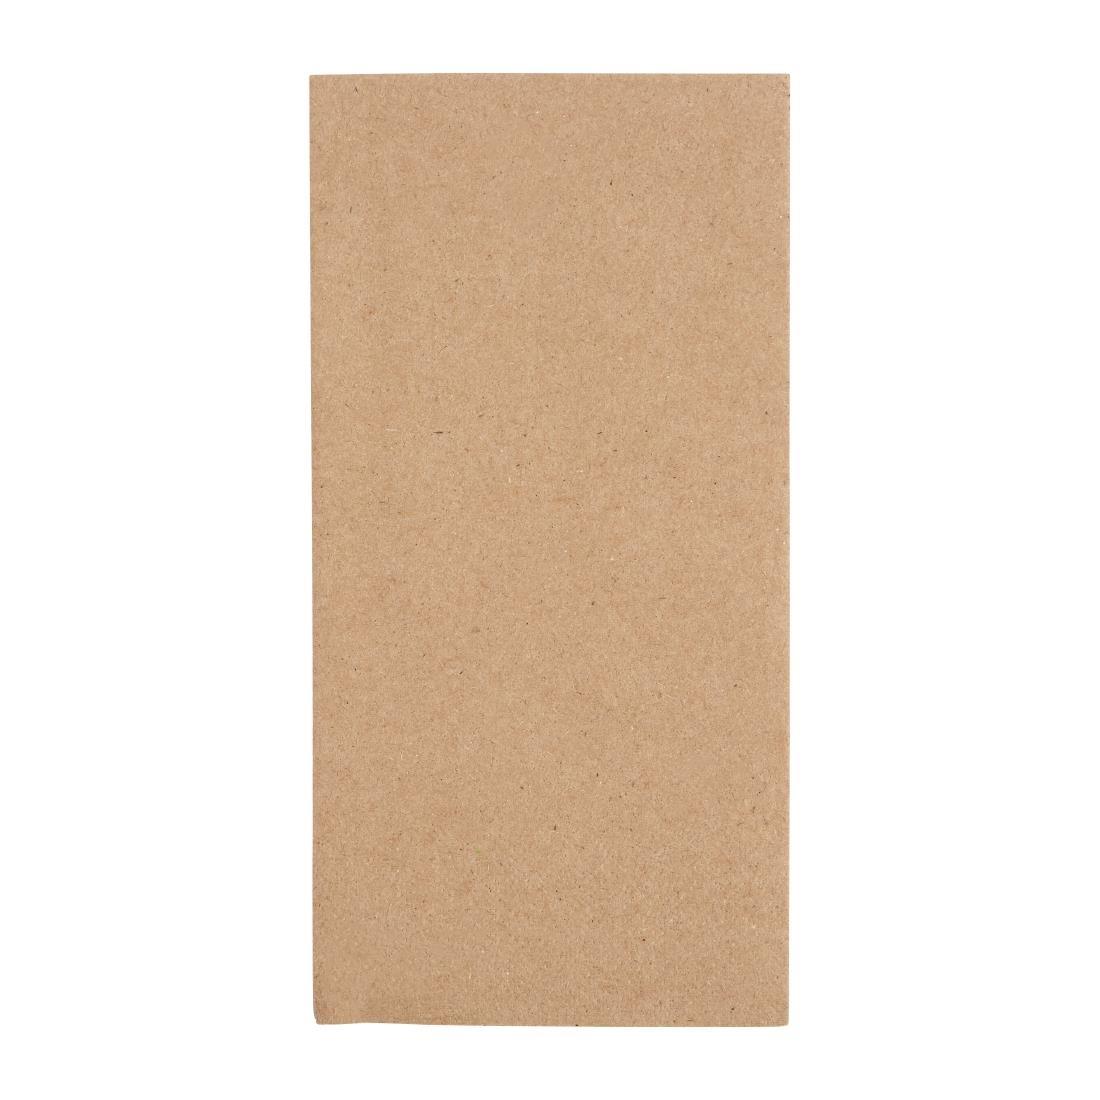 Fiesta Recyclable Recycled Dinner Napkin Kraft 40x40cm 2ply 1/8 Fold (Pack of 2000) - FE250  - 1